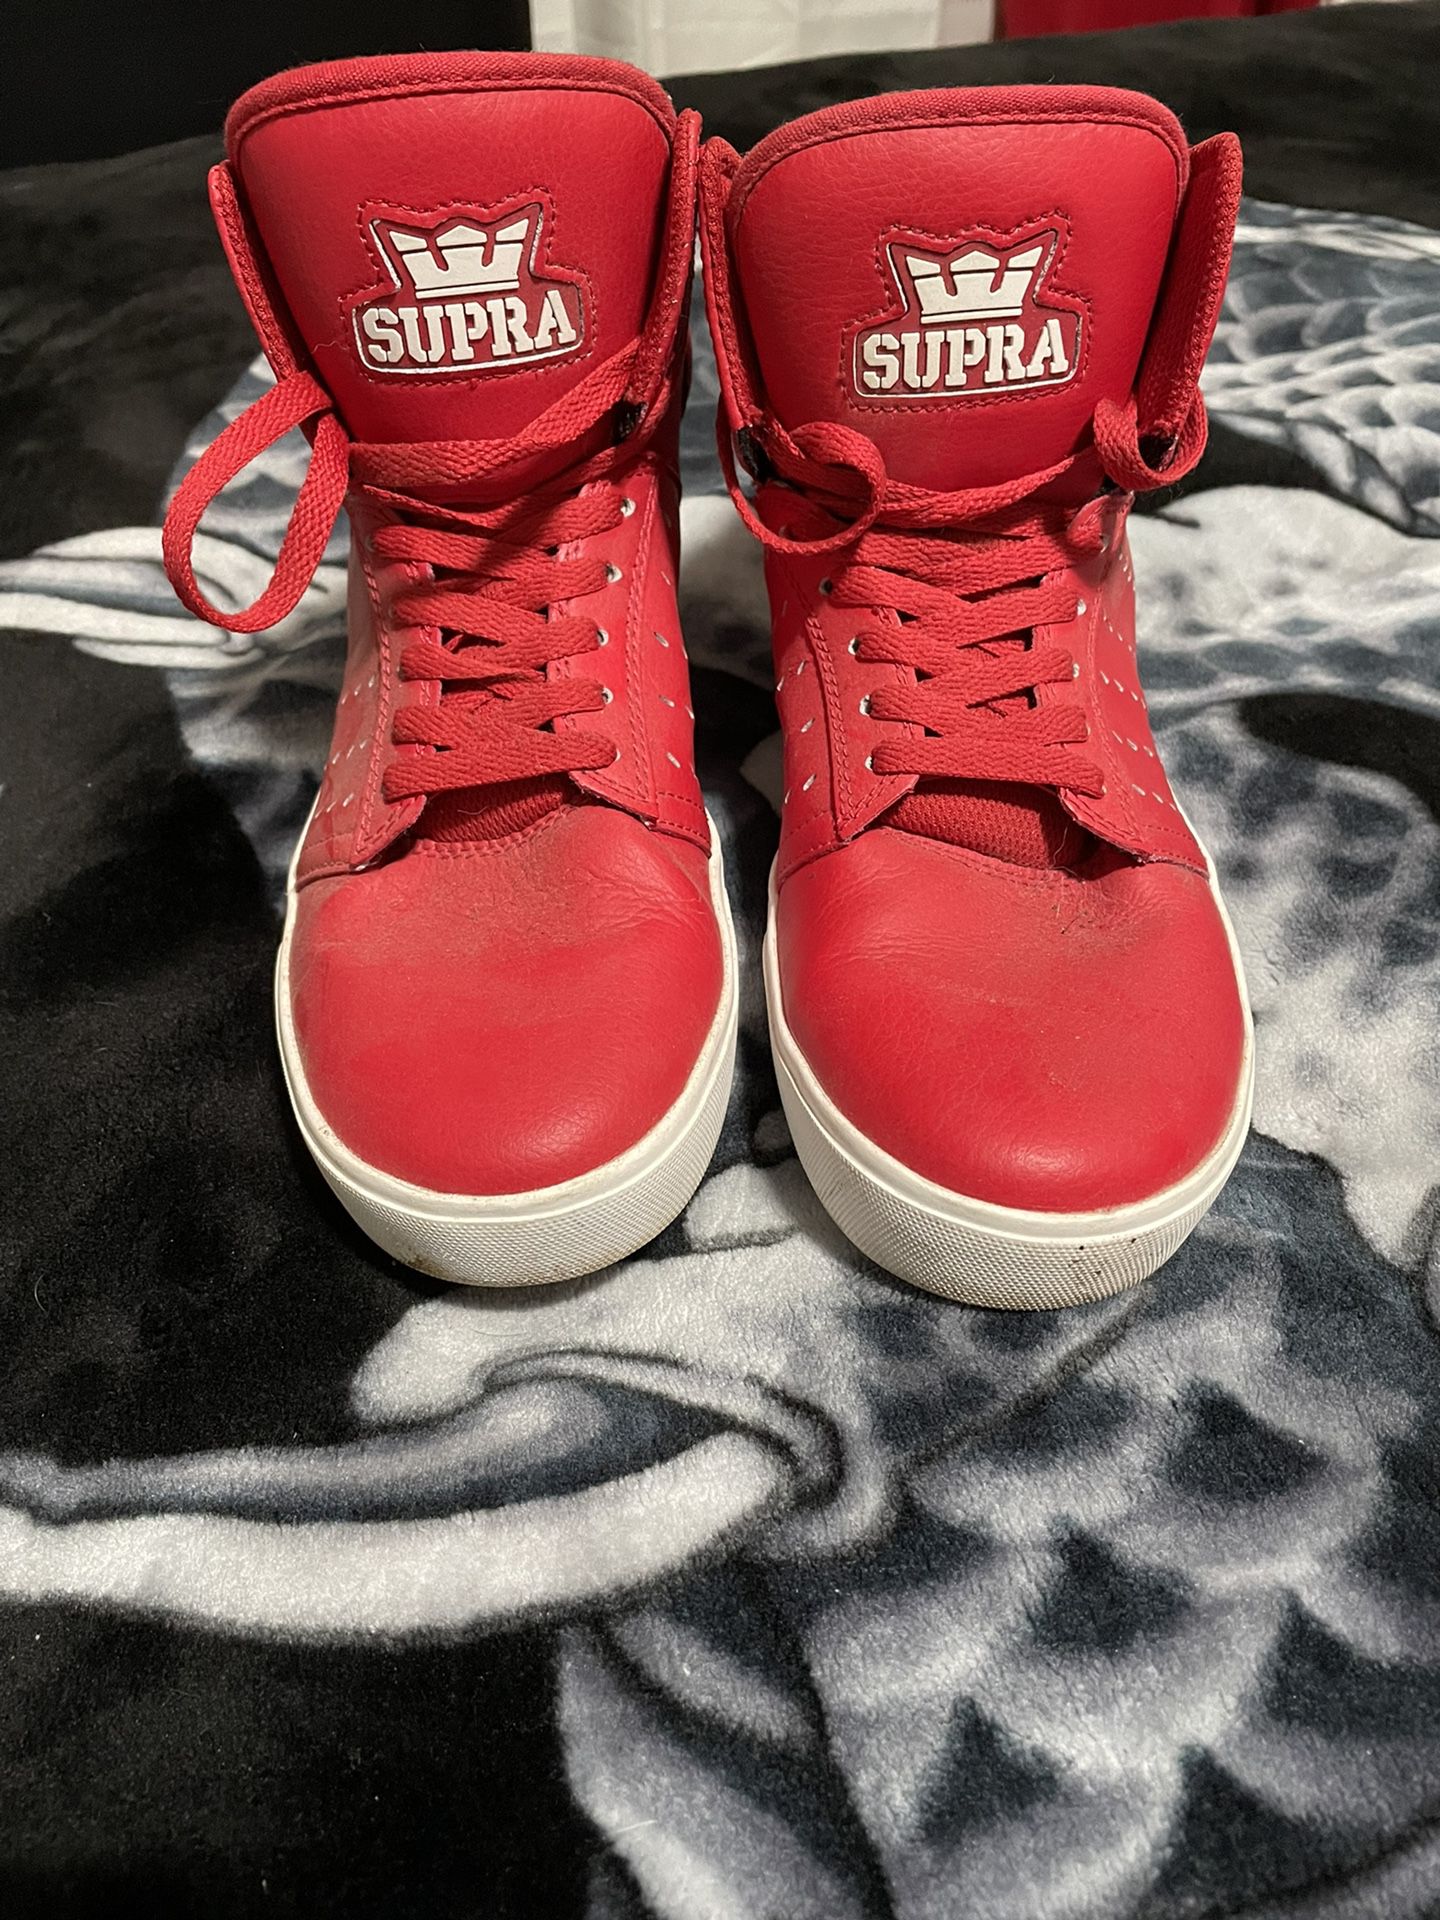 trechter Oh Oefenen Supra Shoes for Sale in Bremerton, WA - OfferUp